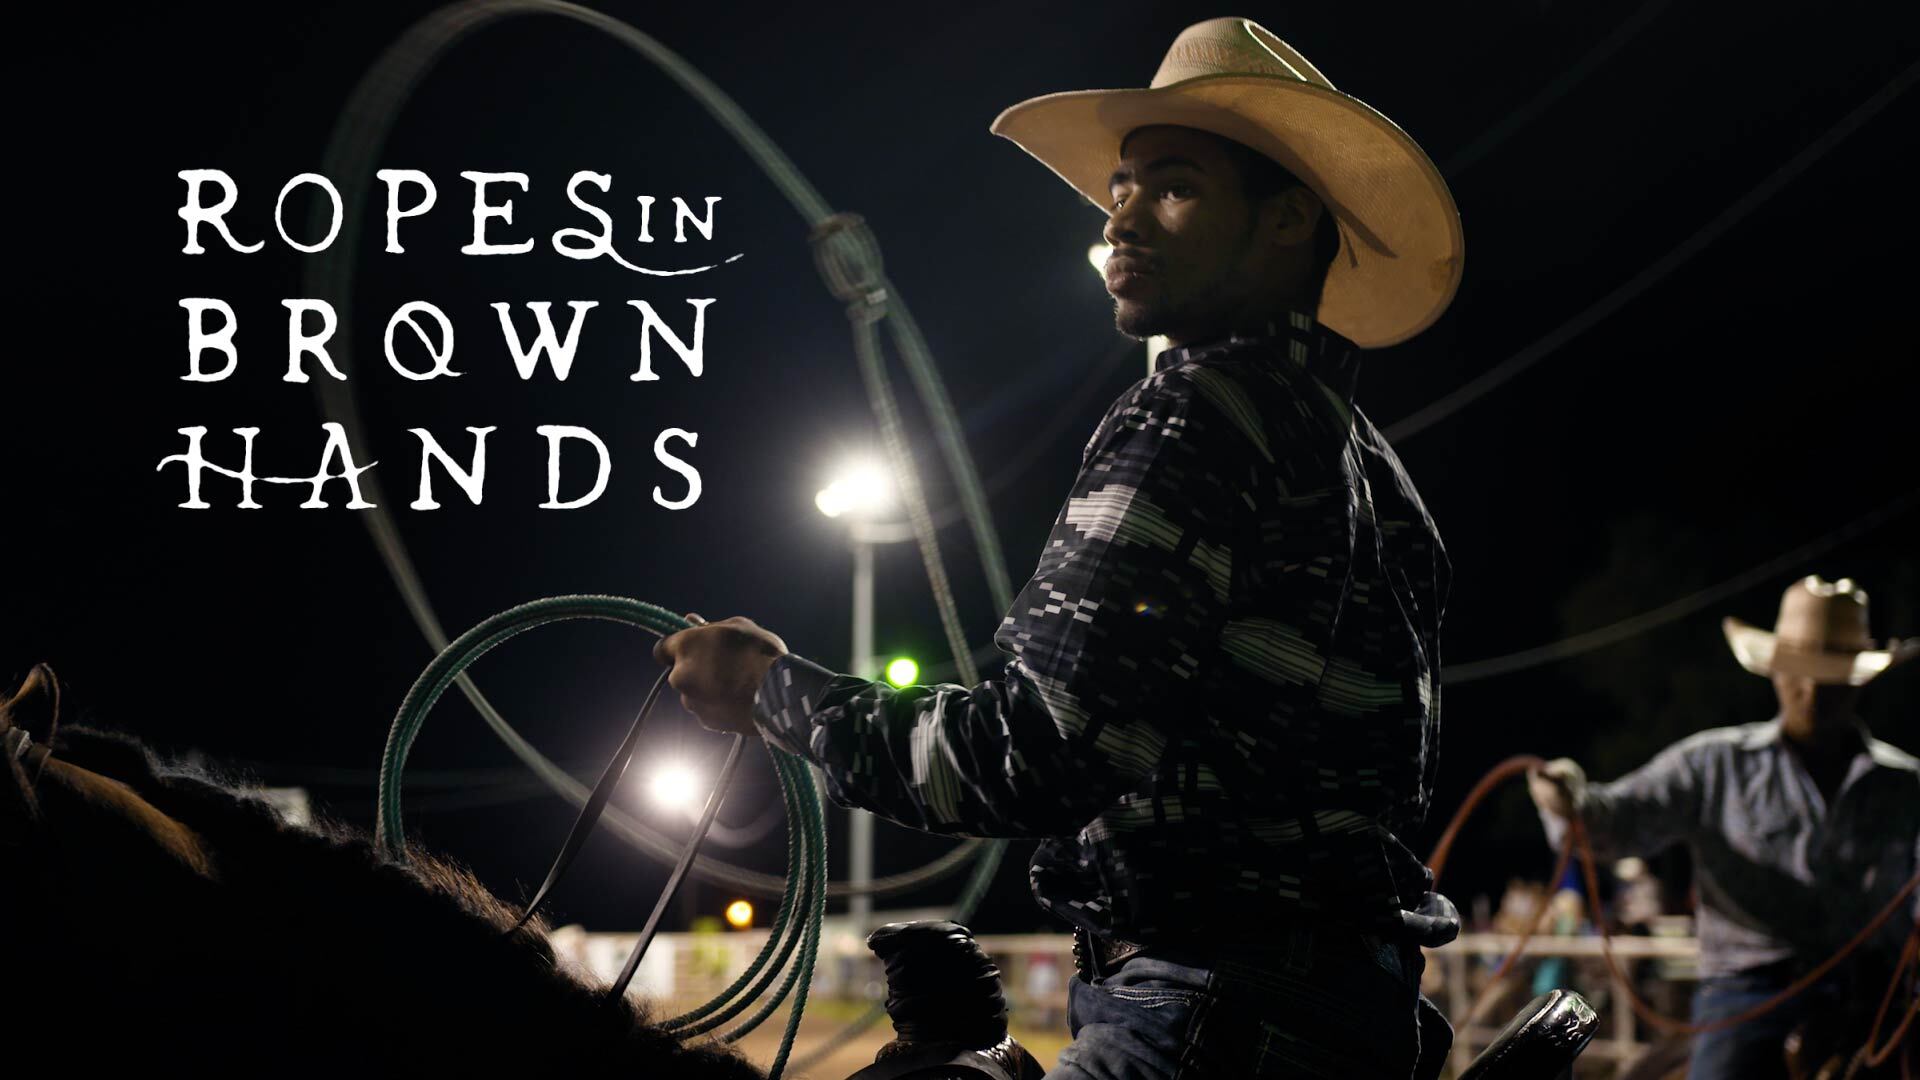 ropes in brown hands newsy documentary logo